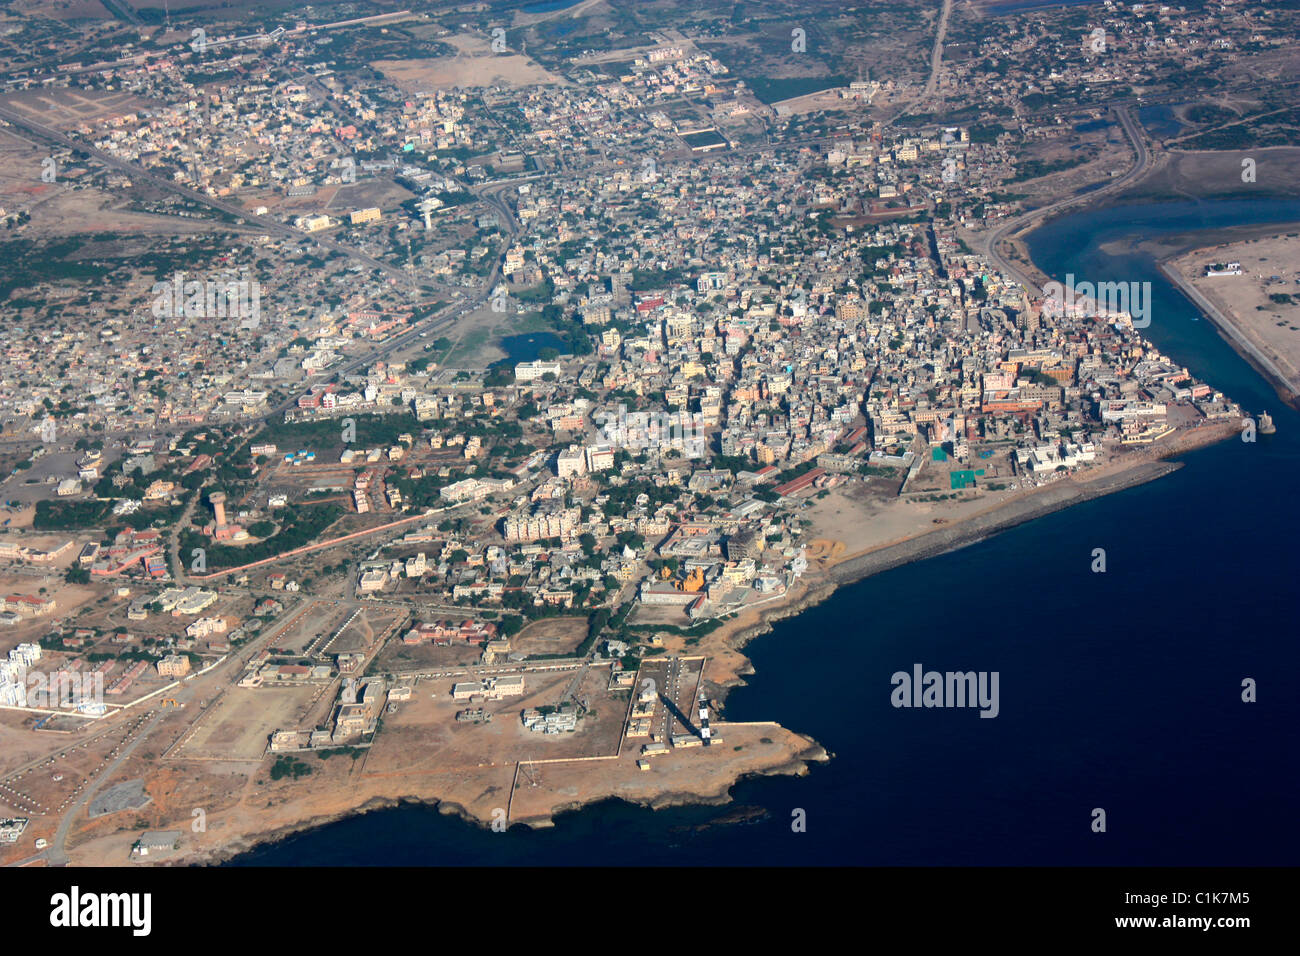 An aerial view of Dwarka city of Gujarat, India Stock Photo